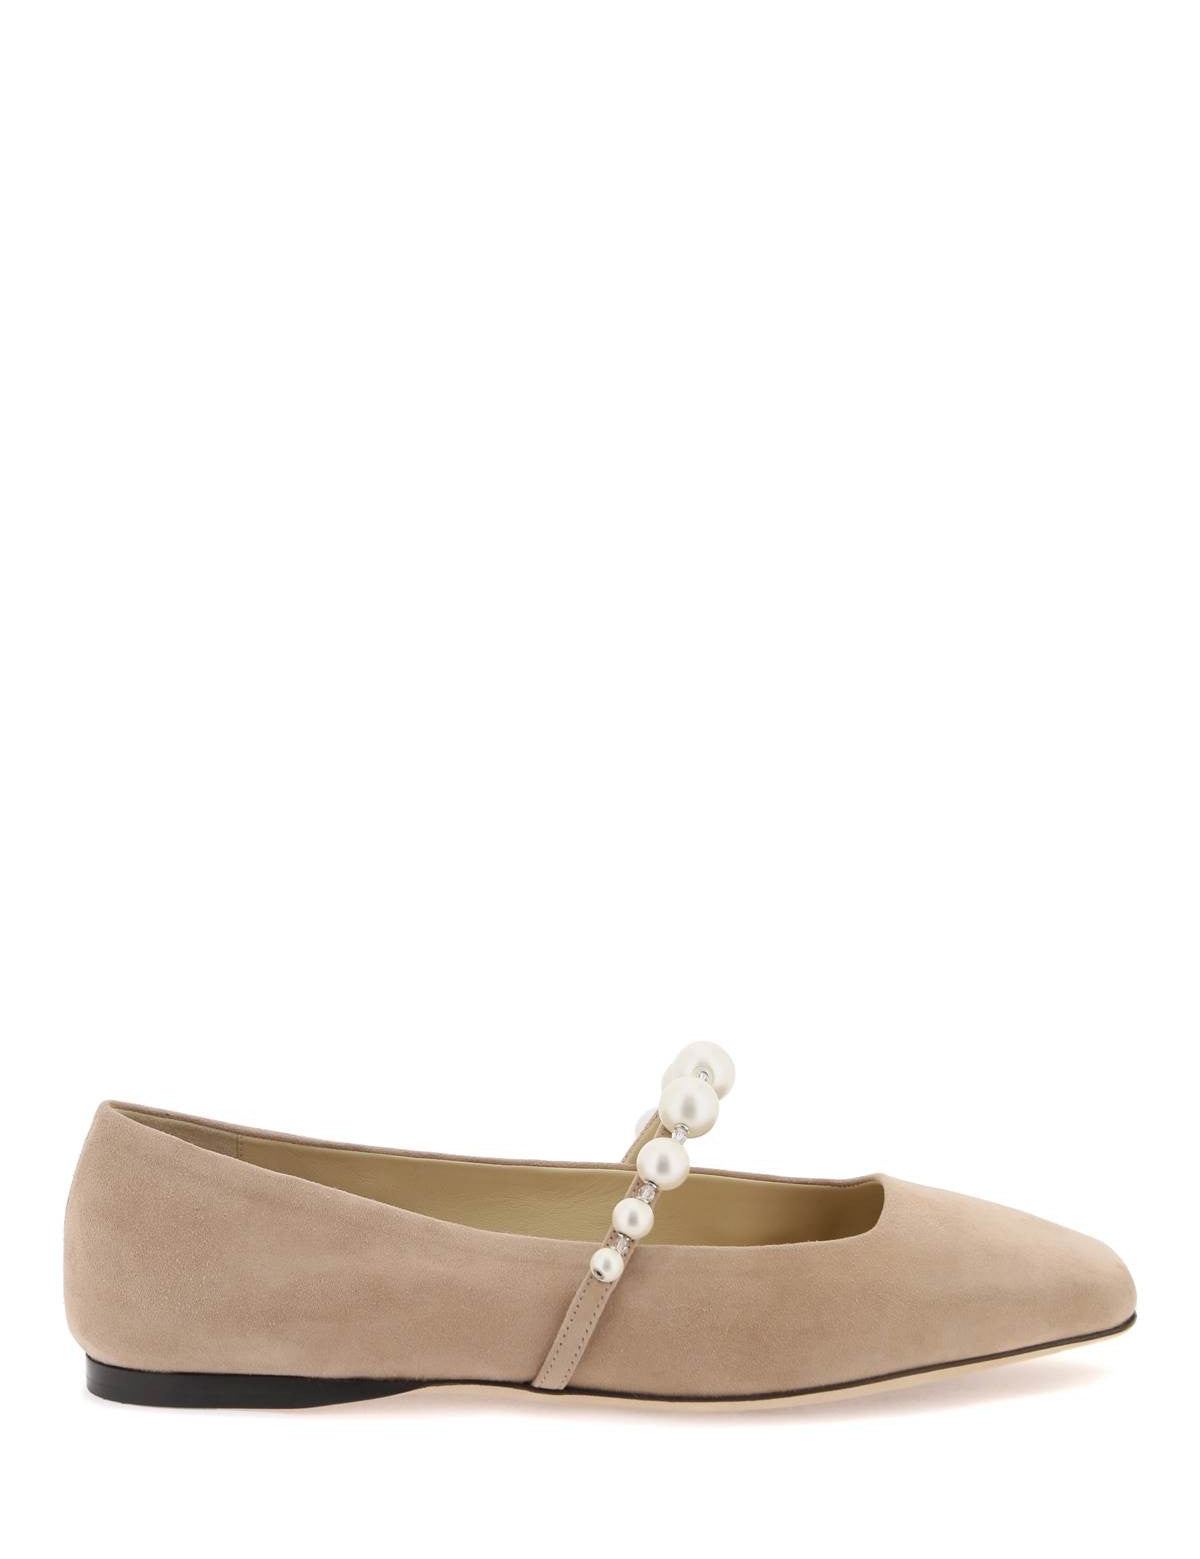 jimmy-choo-suede-leather-ballerina-flats-with-pearl.jpg